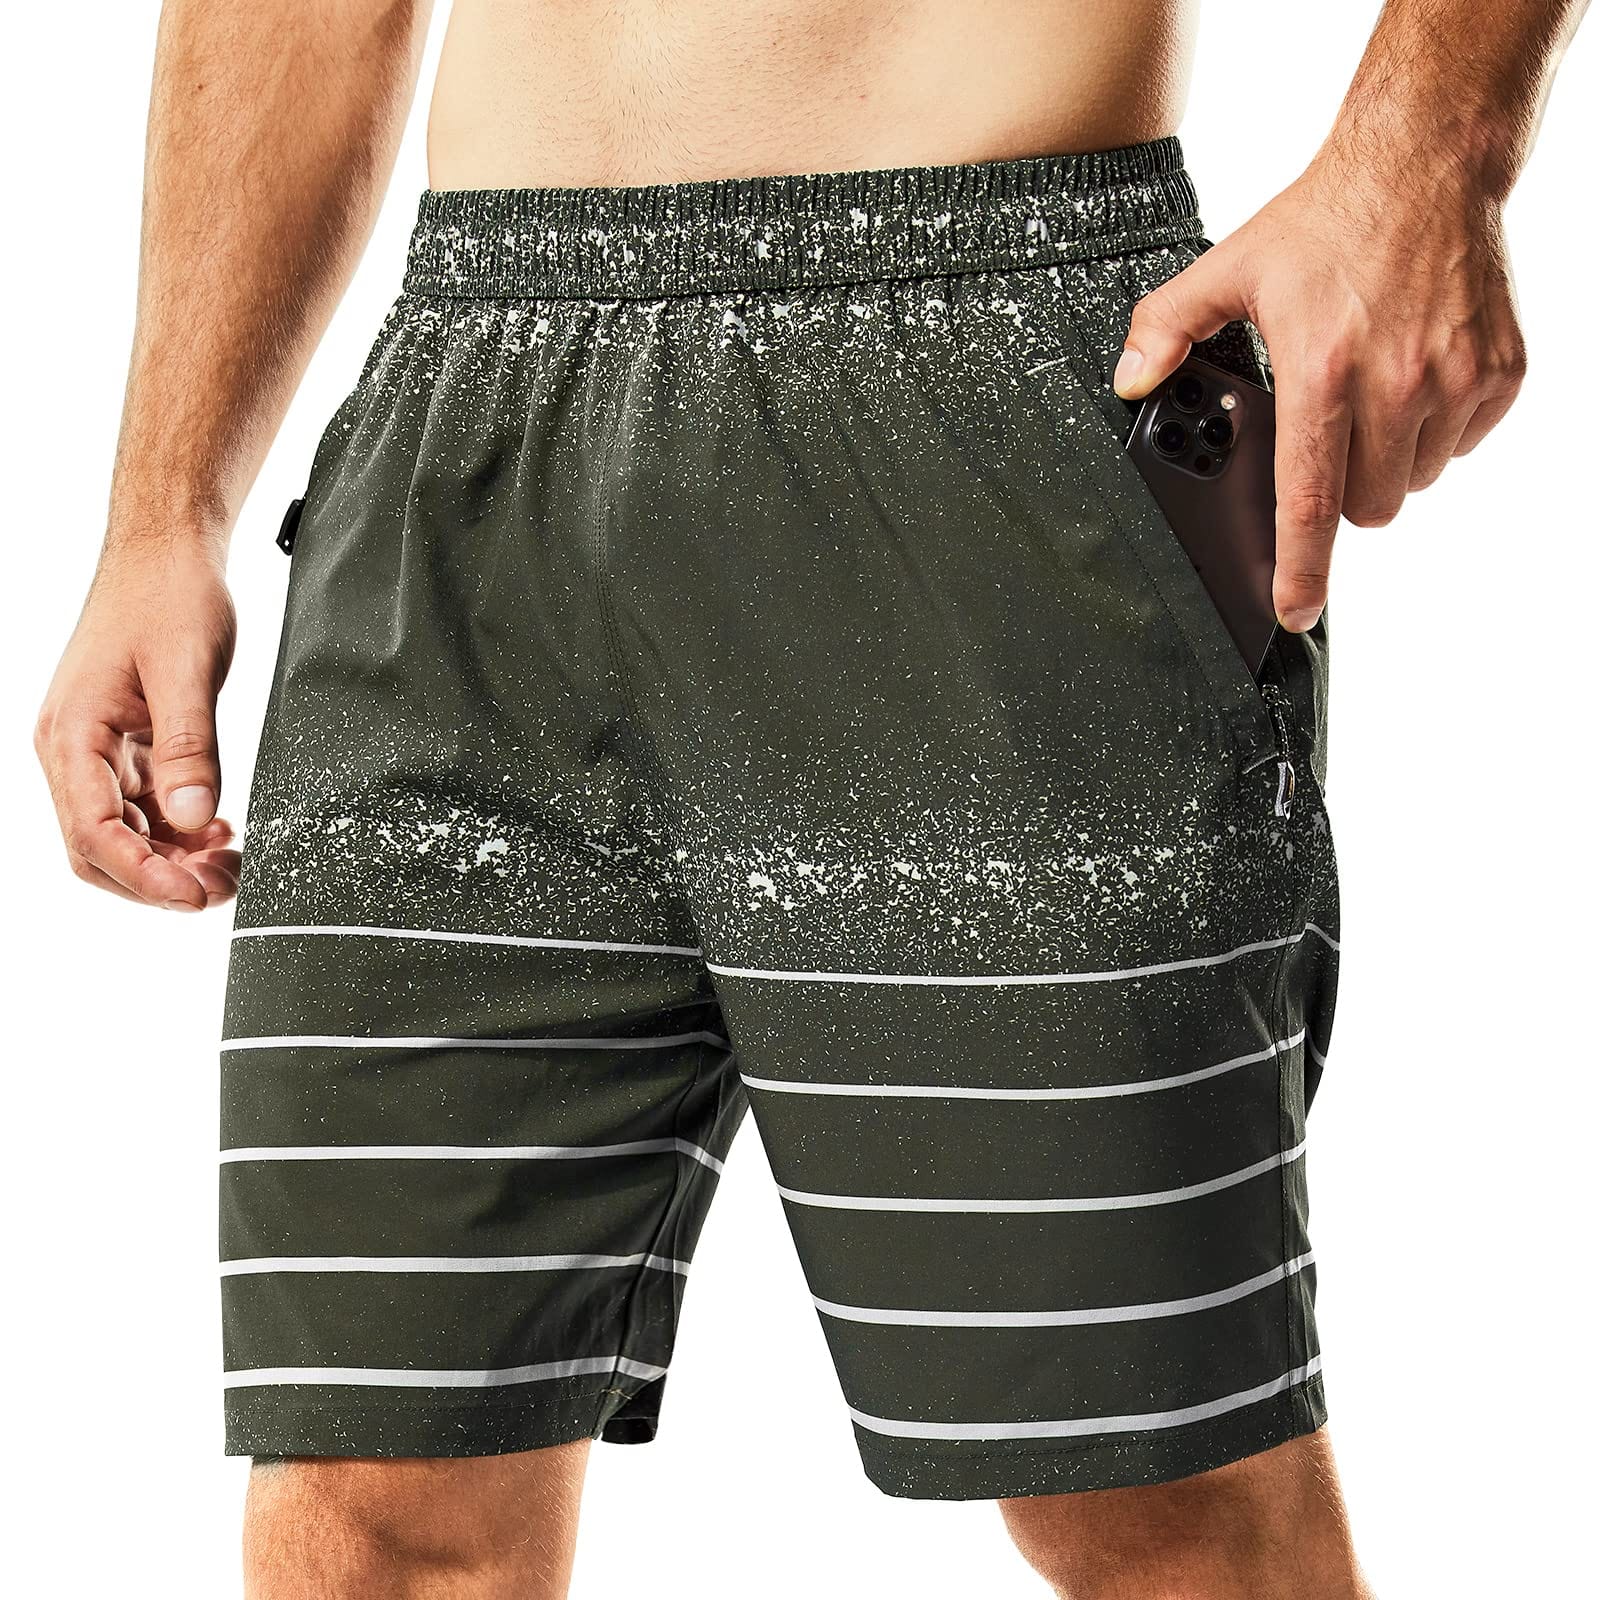 Men's Dry Fit Athletic Gym Shorts with Zipper Pockets 7 inch Men's Shorts Print Army Green / S MIER